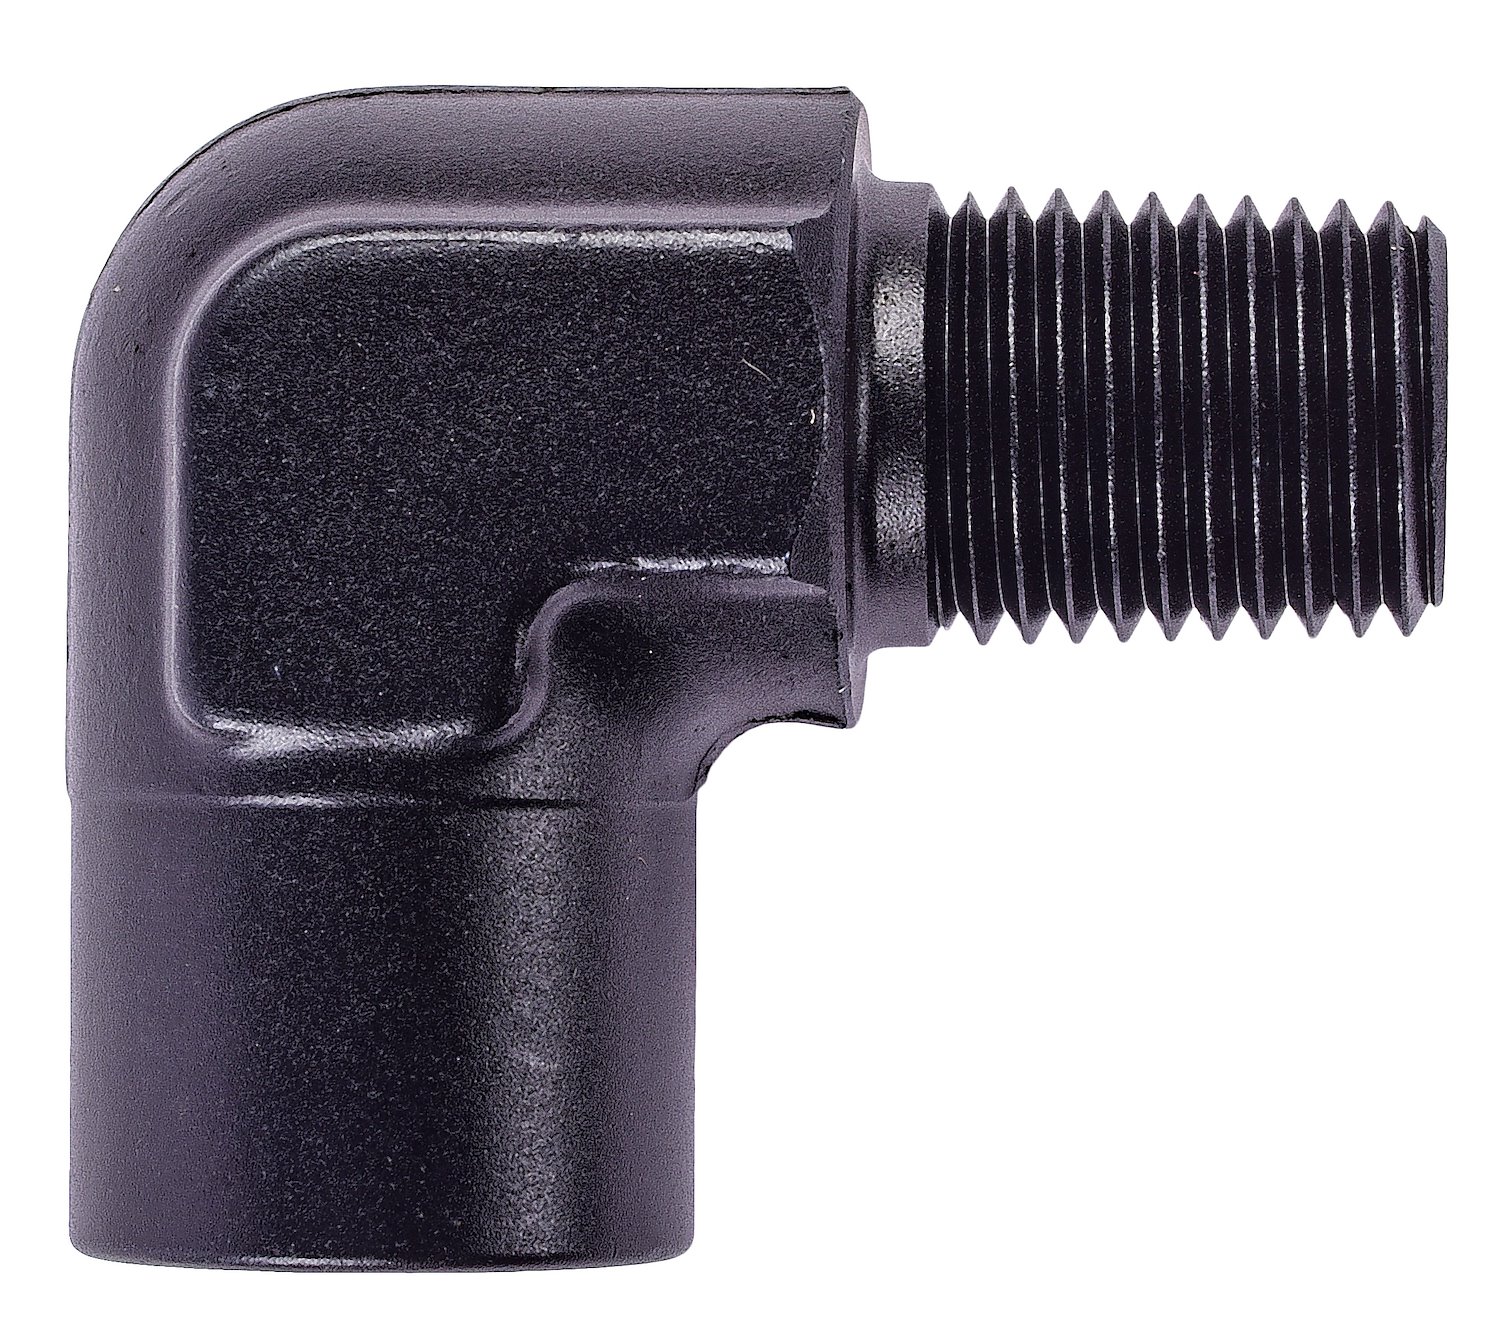 NPT to NPT 90-Degree Adapter Fitting [1/4 in. NPT Male to 1/4 in. NPT Female, Black]